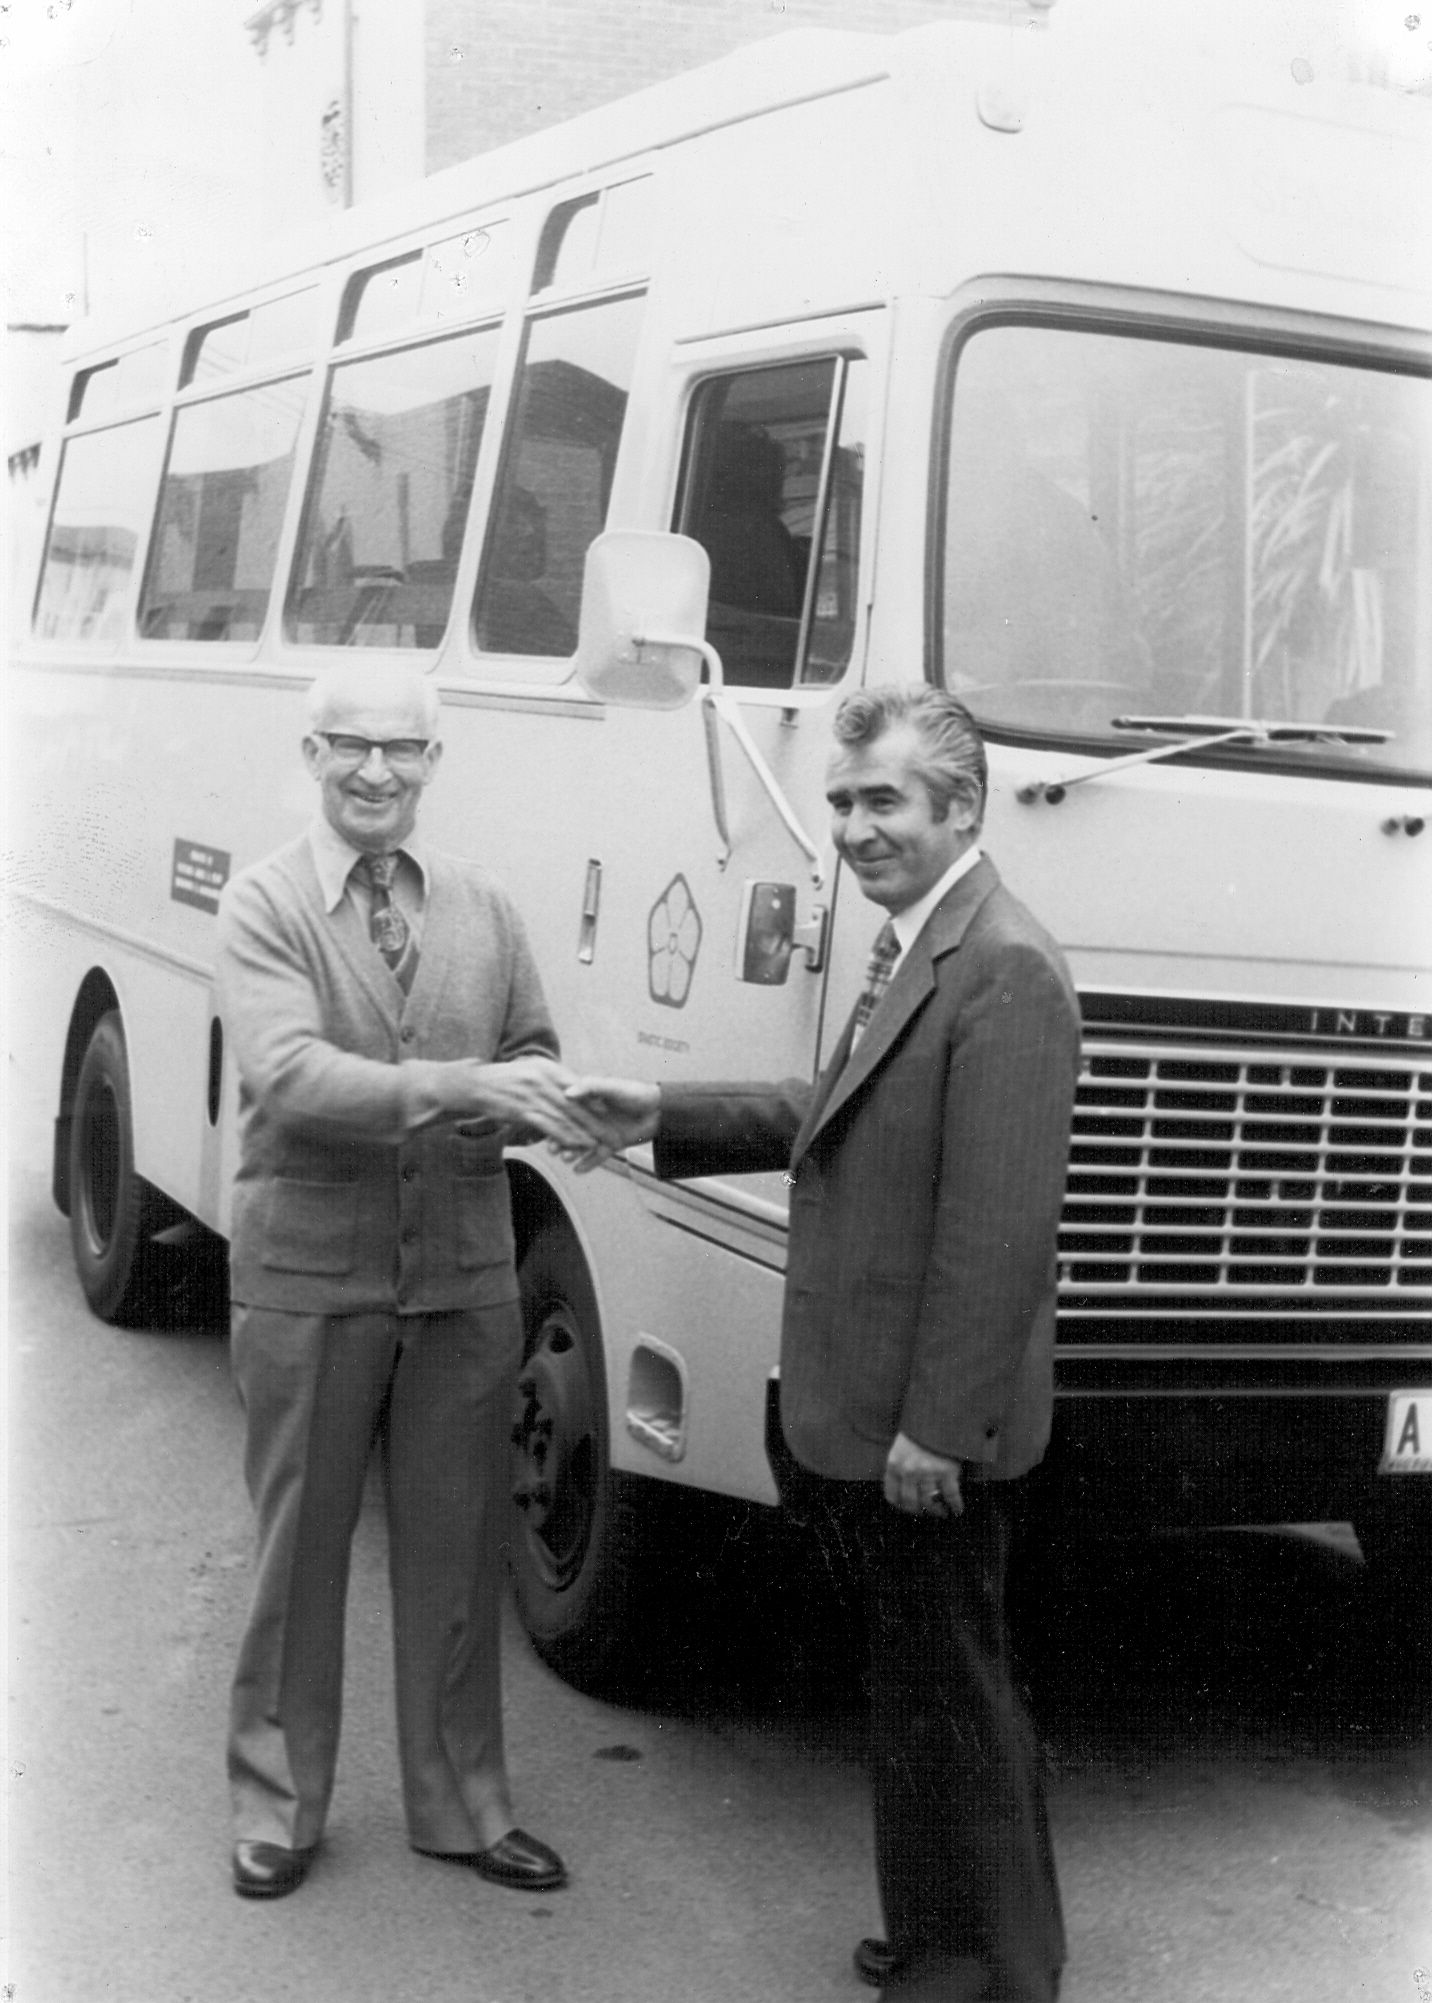 Luigi Zoran, Manager of the FJ Brunswick factory, presents a cheque to Spastic Centre towards their bus."The bus was given to the Northern Districts Spastic Centre in Pascoe Vale and is described by them as 'one of the best Christmas presents ever received."  Photo: Jones Family Collection 